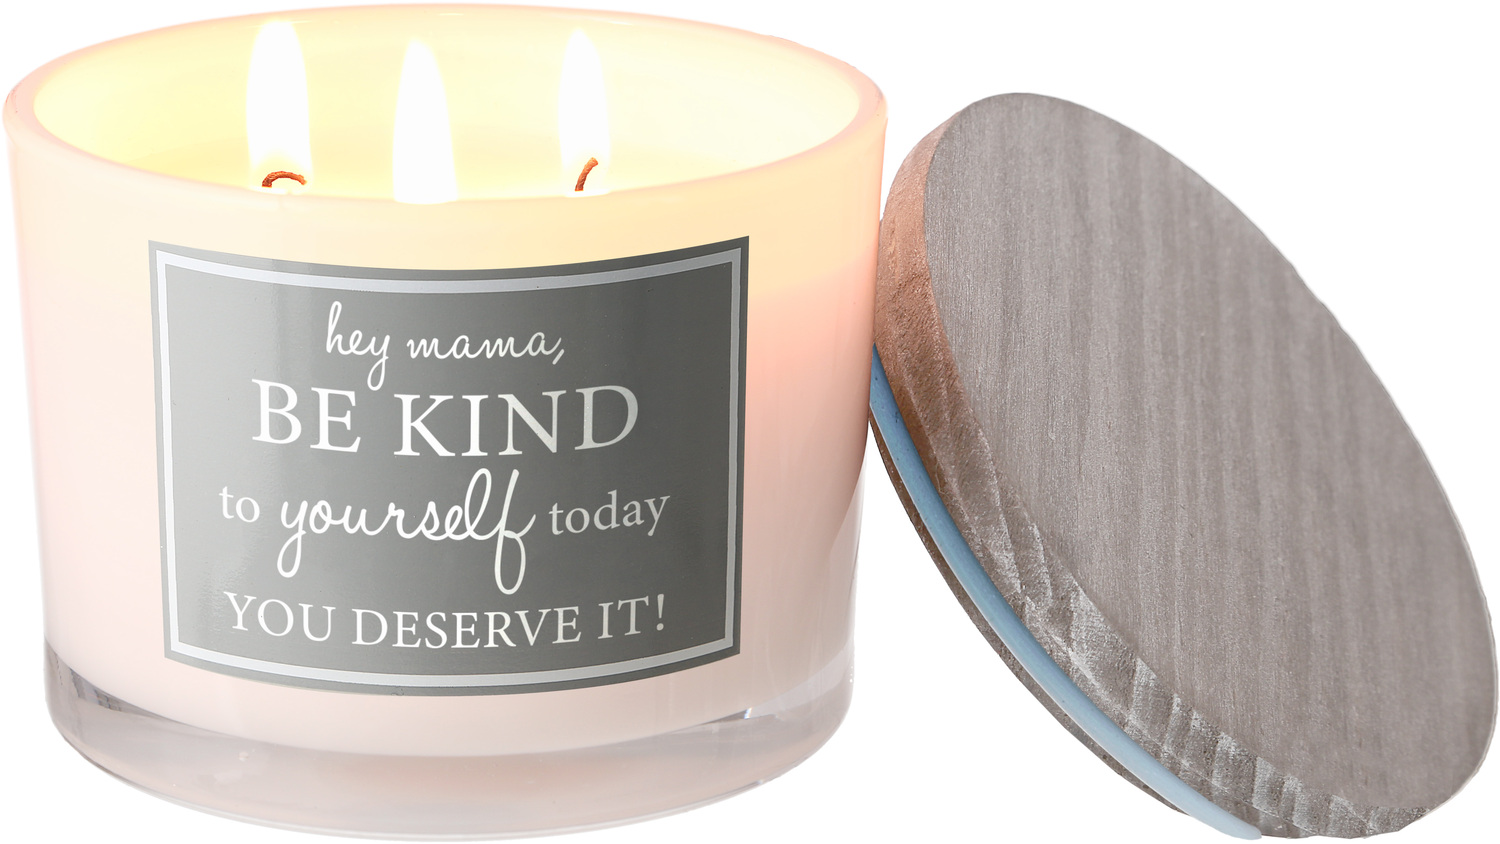 Be Kind by A-Parent-ly - Be Kind - 11 oz - 100% Soy Wax Candle
Scent: Fresh Cotton